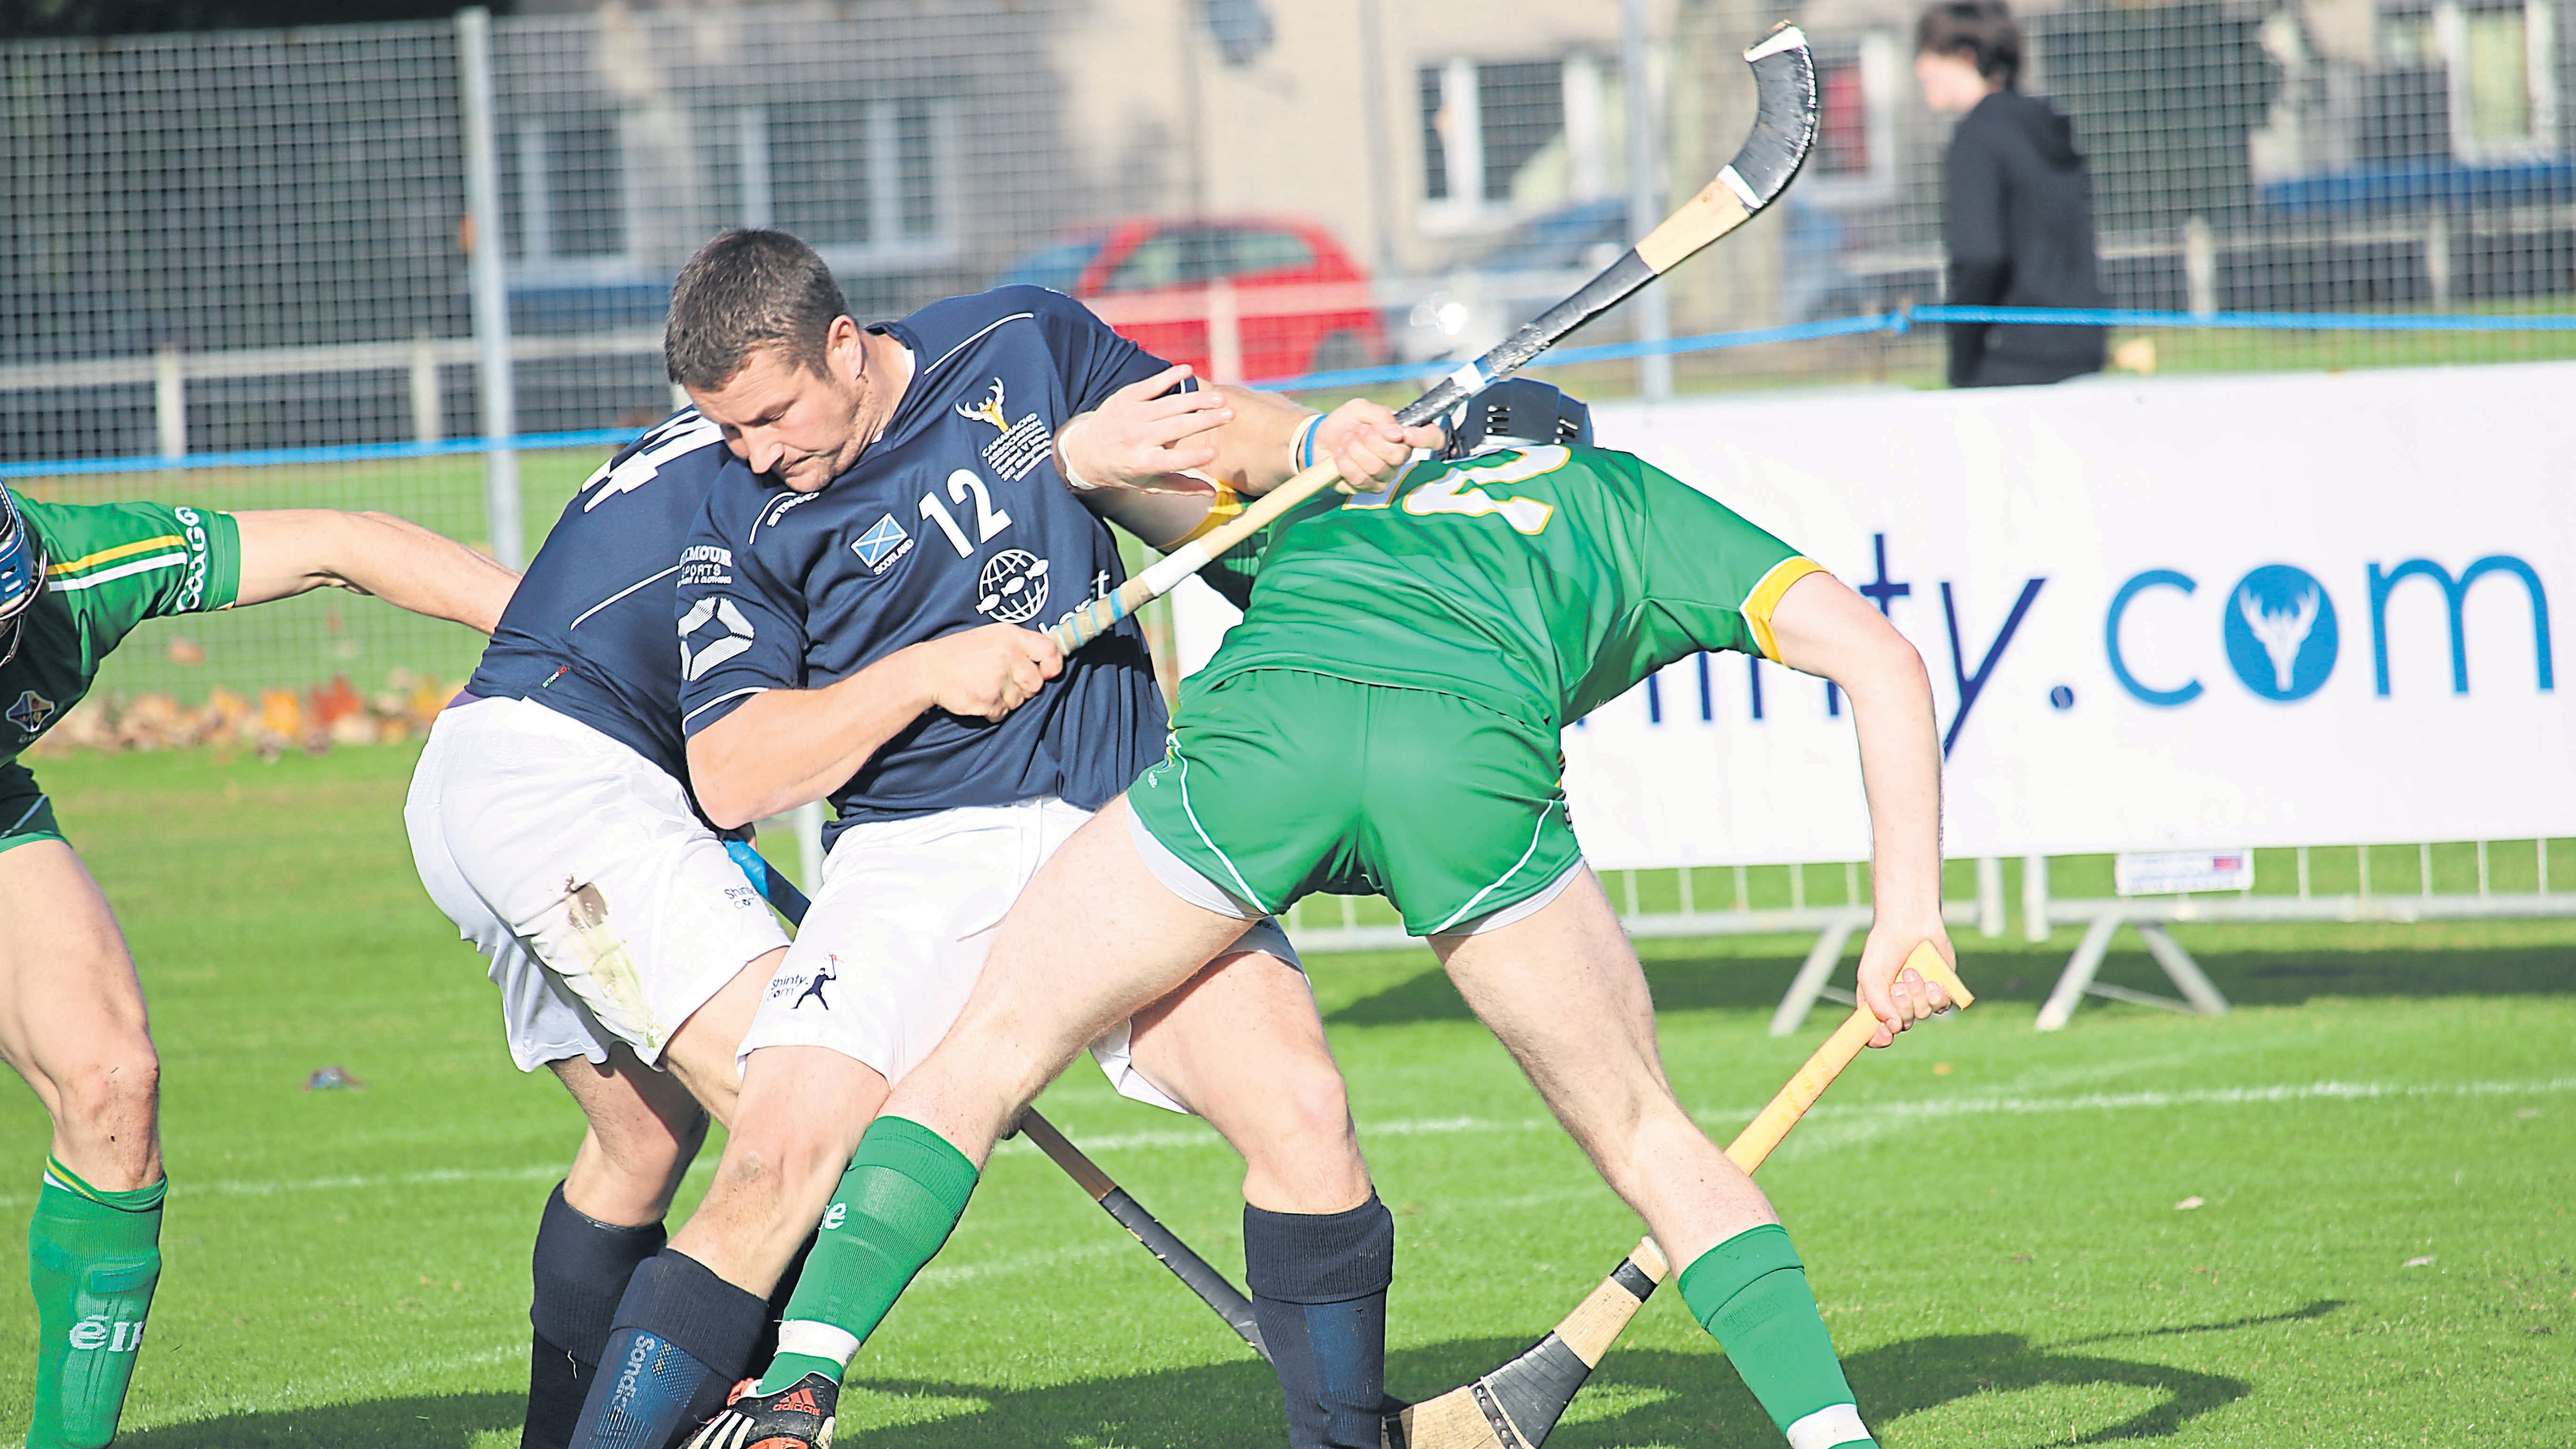 IN THE THICK OF IT: Ireland and Scotland players do battle at Bught Park on Saturday